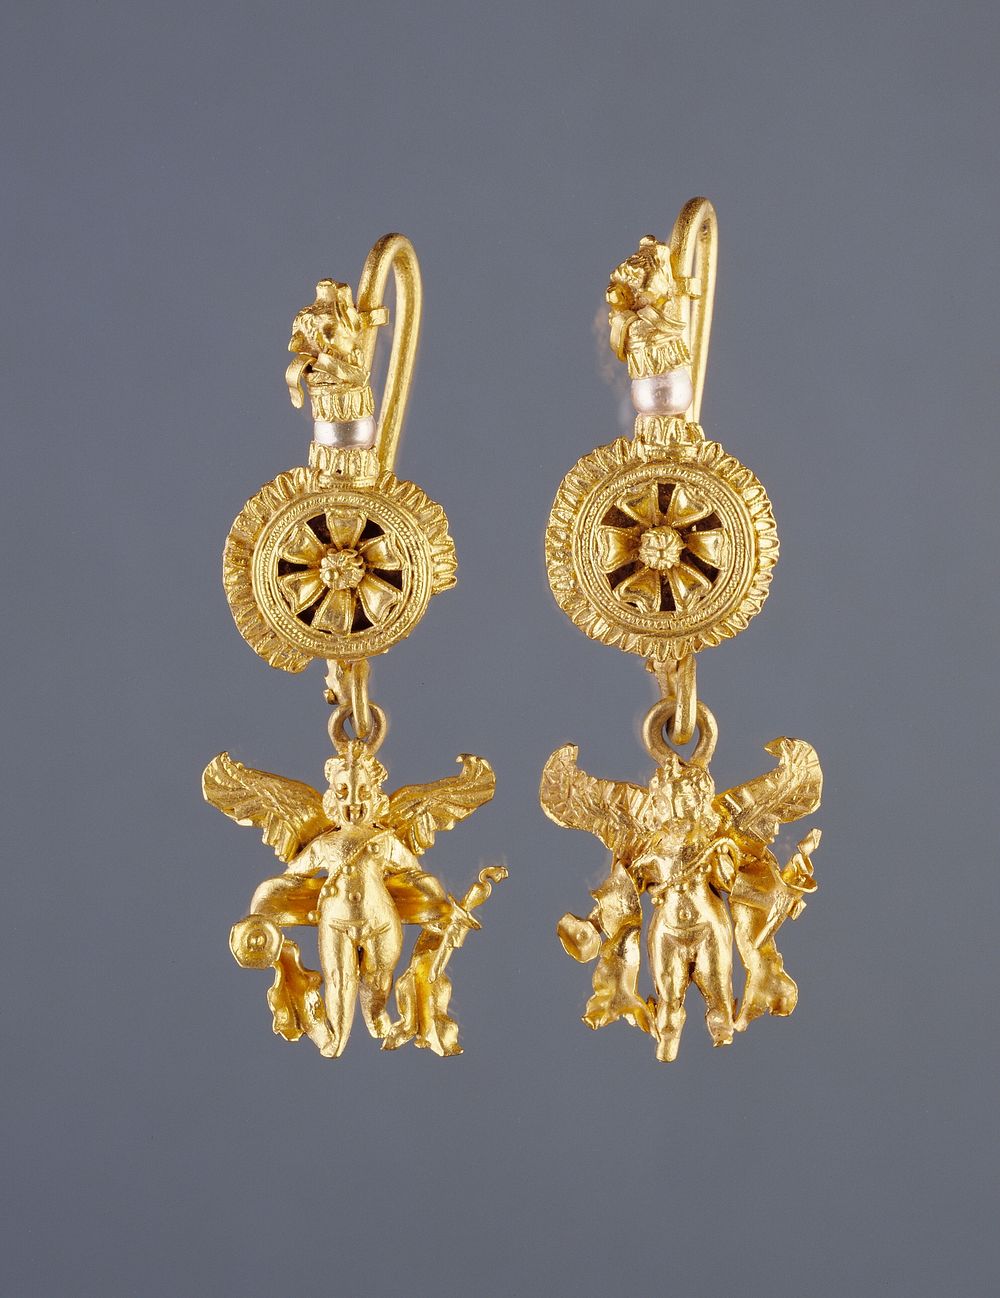 Pair of Disk Pendant Earrings with a Figure of Eros